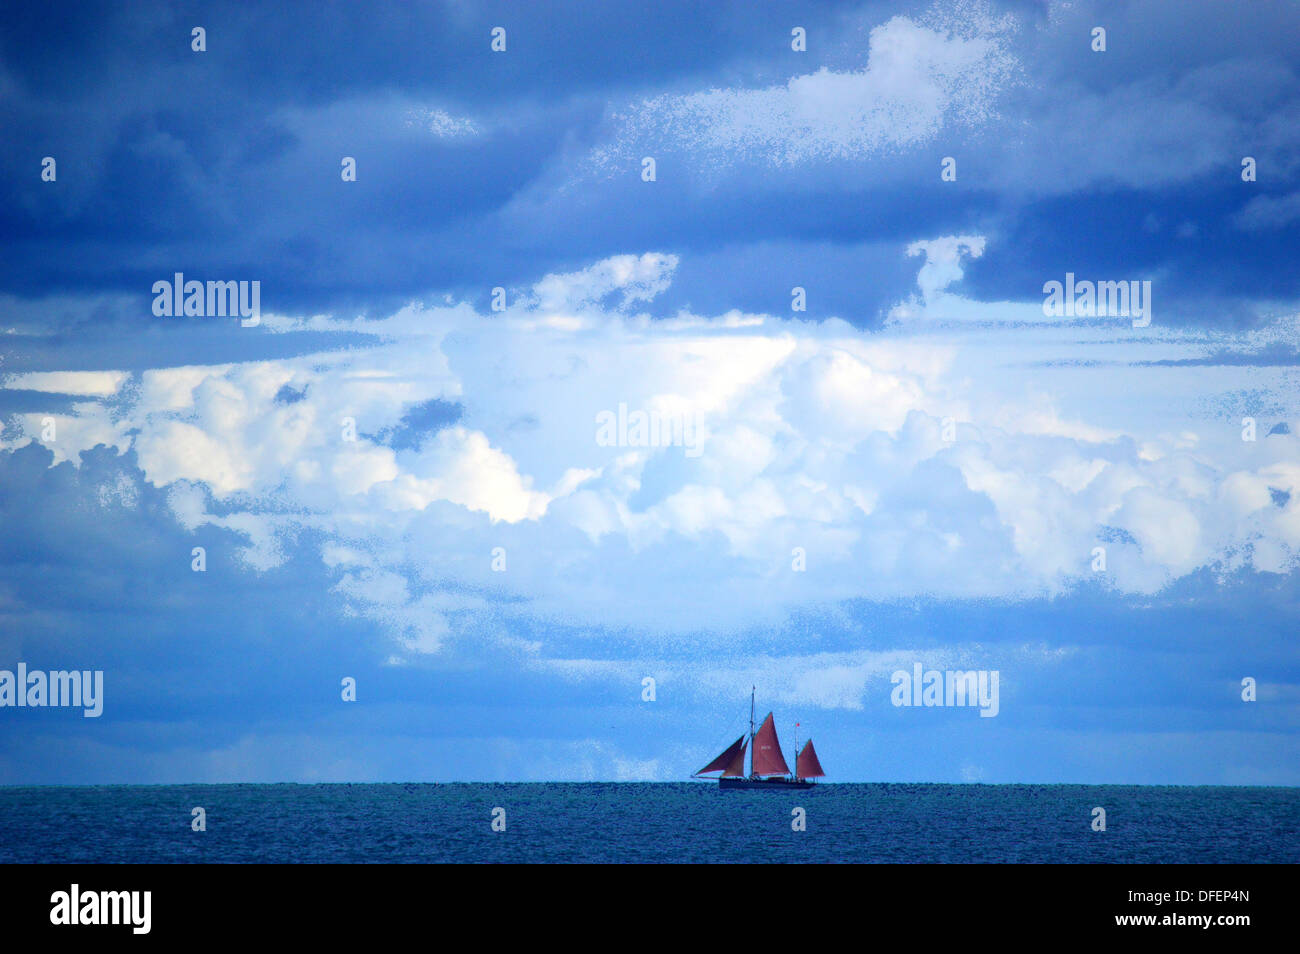 Red sails of ship on horizon with stormy clouded sky Stock Photo